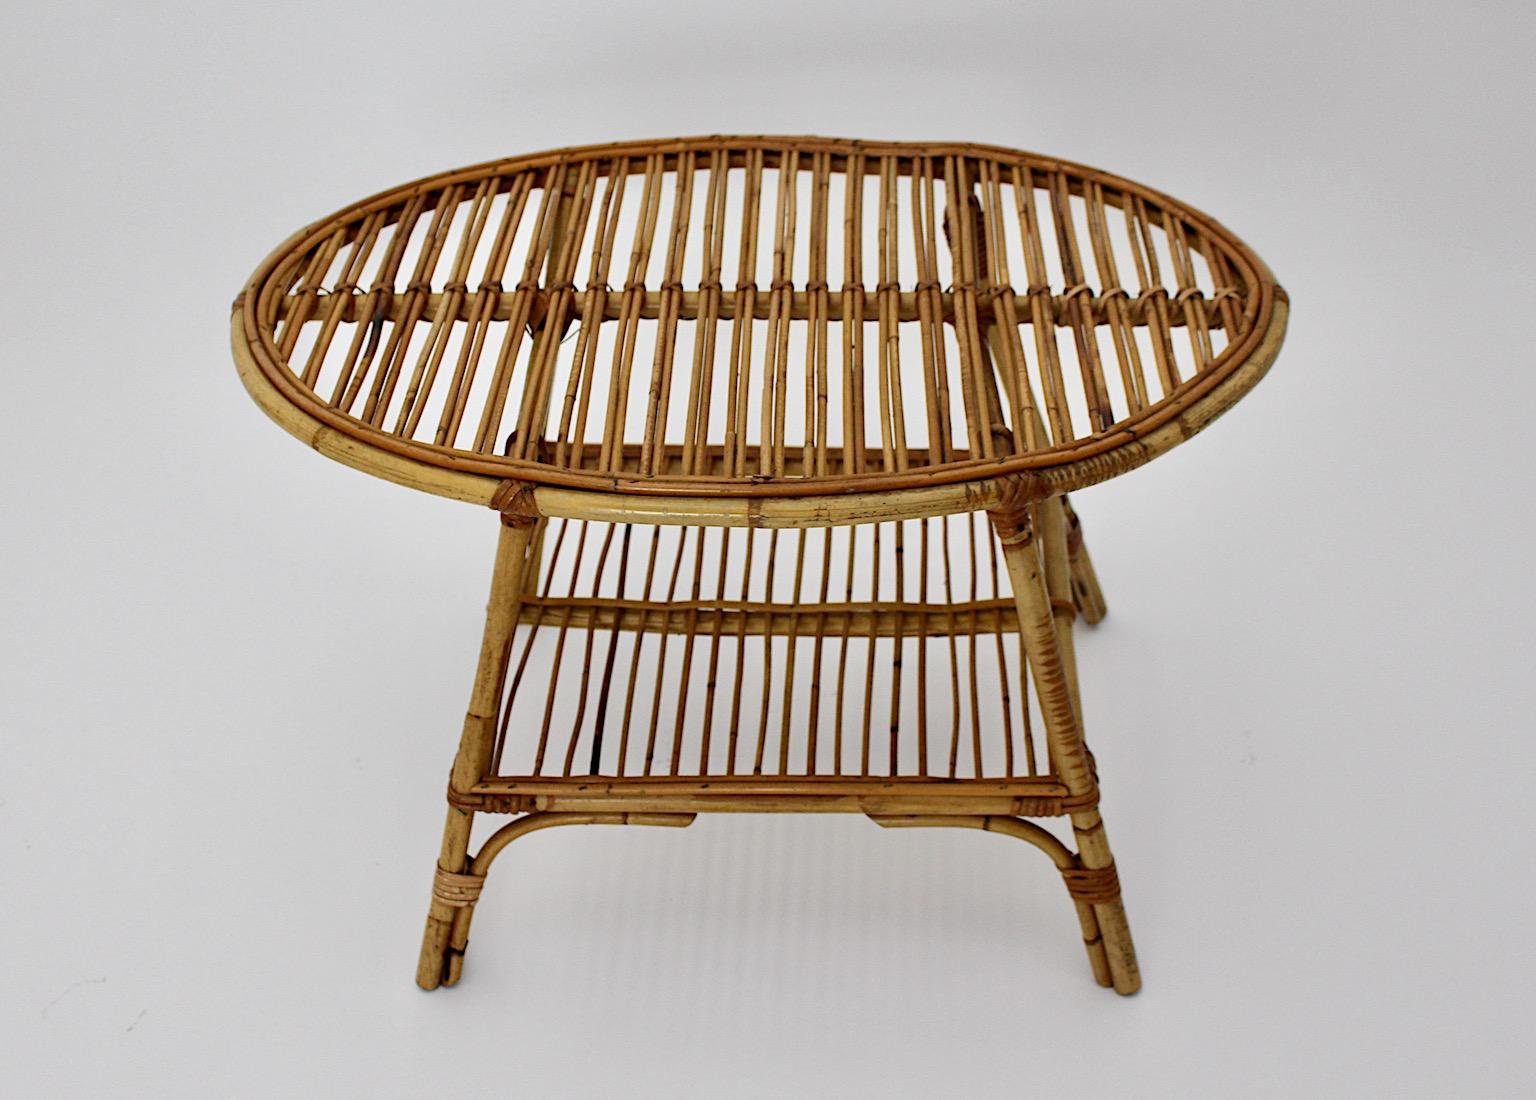 Riviera Style organic vintage patio coffee table or side table from rattan with two tiers oval like 1950s Italy.
A stunning Mid-Century Modern oval like coffee table or side table from amazing
rattan network with two tiers.
This livable coffee